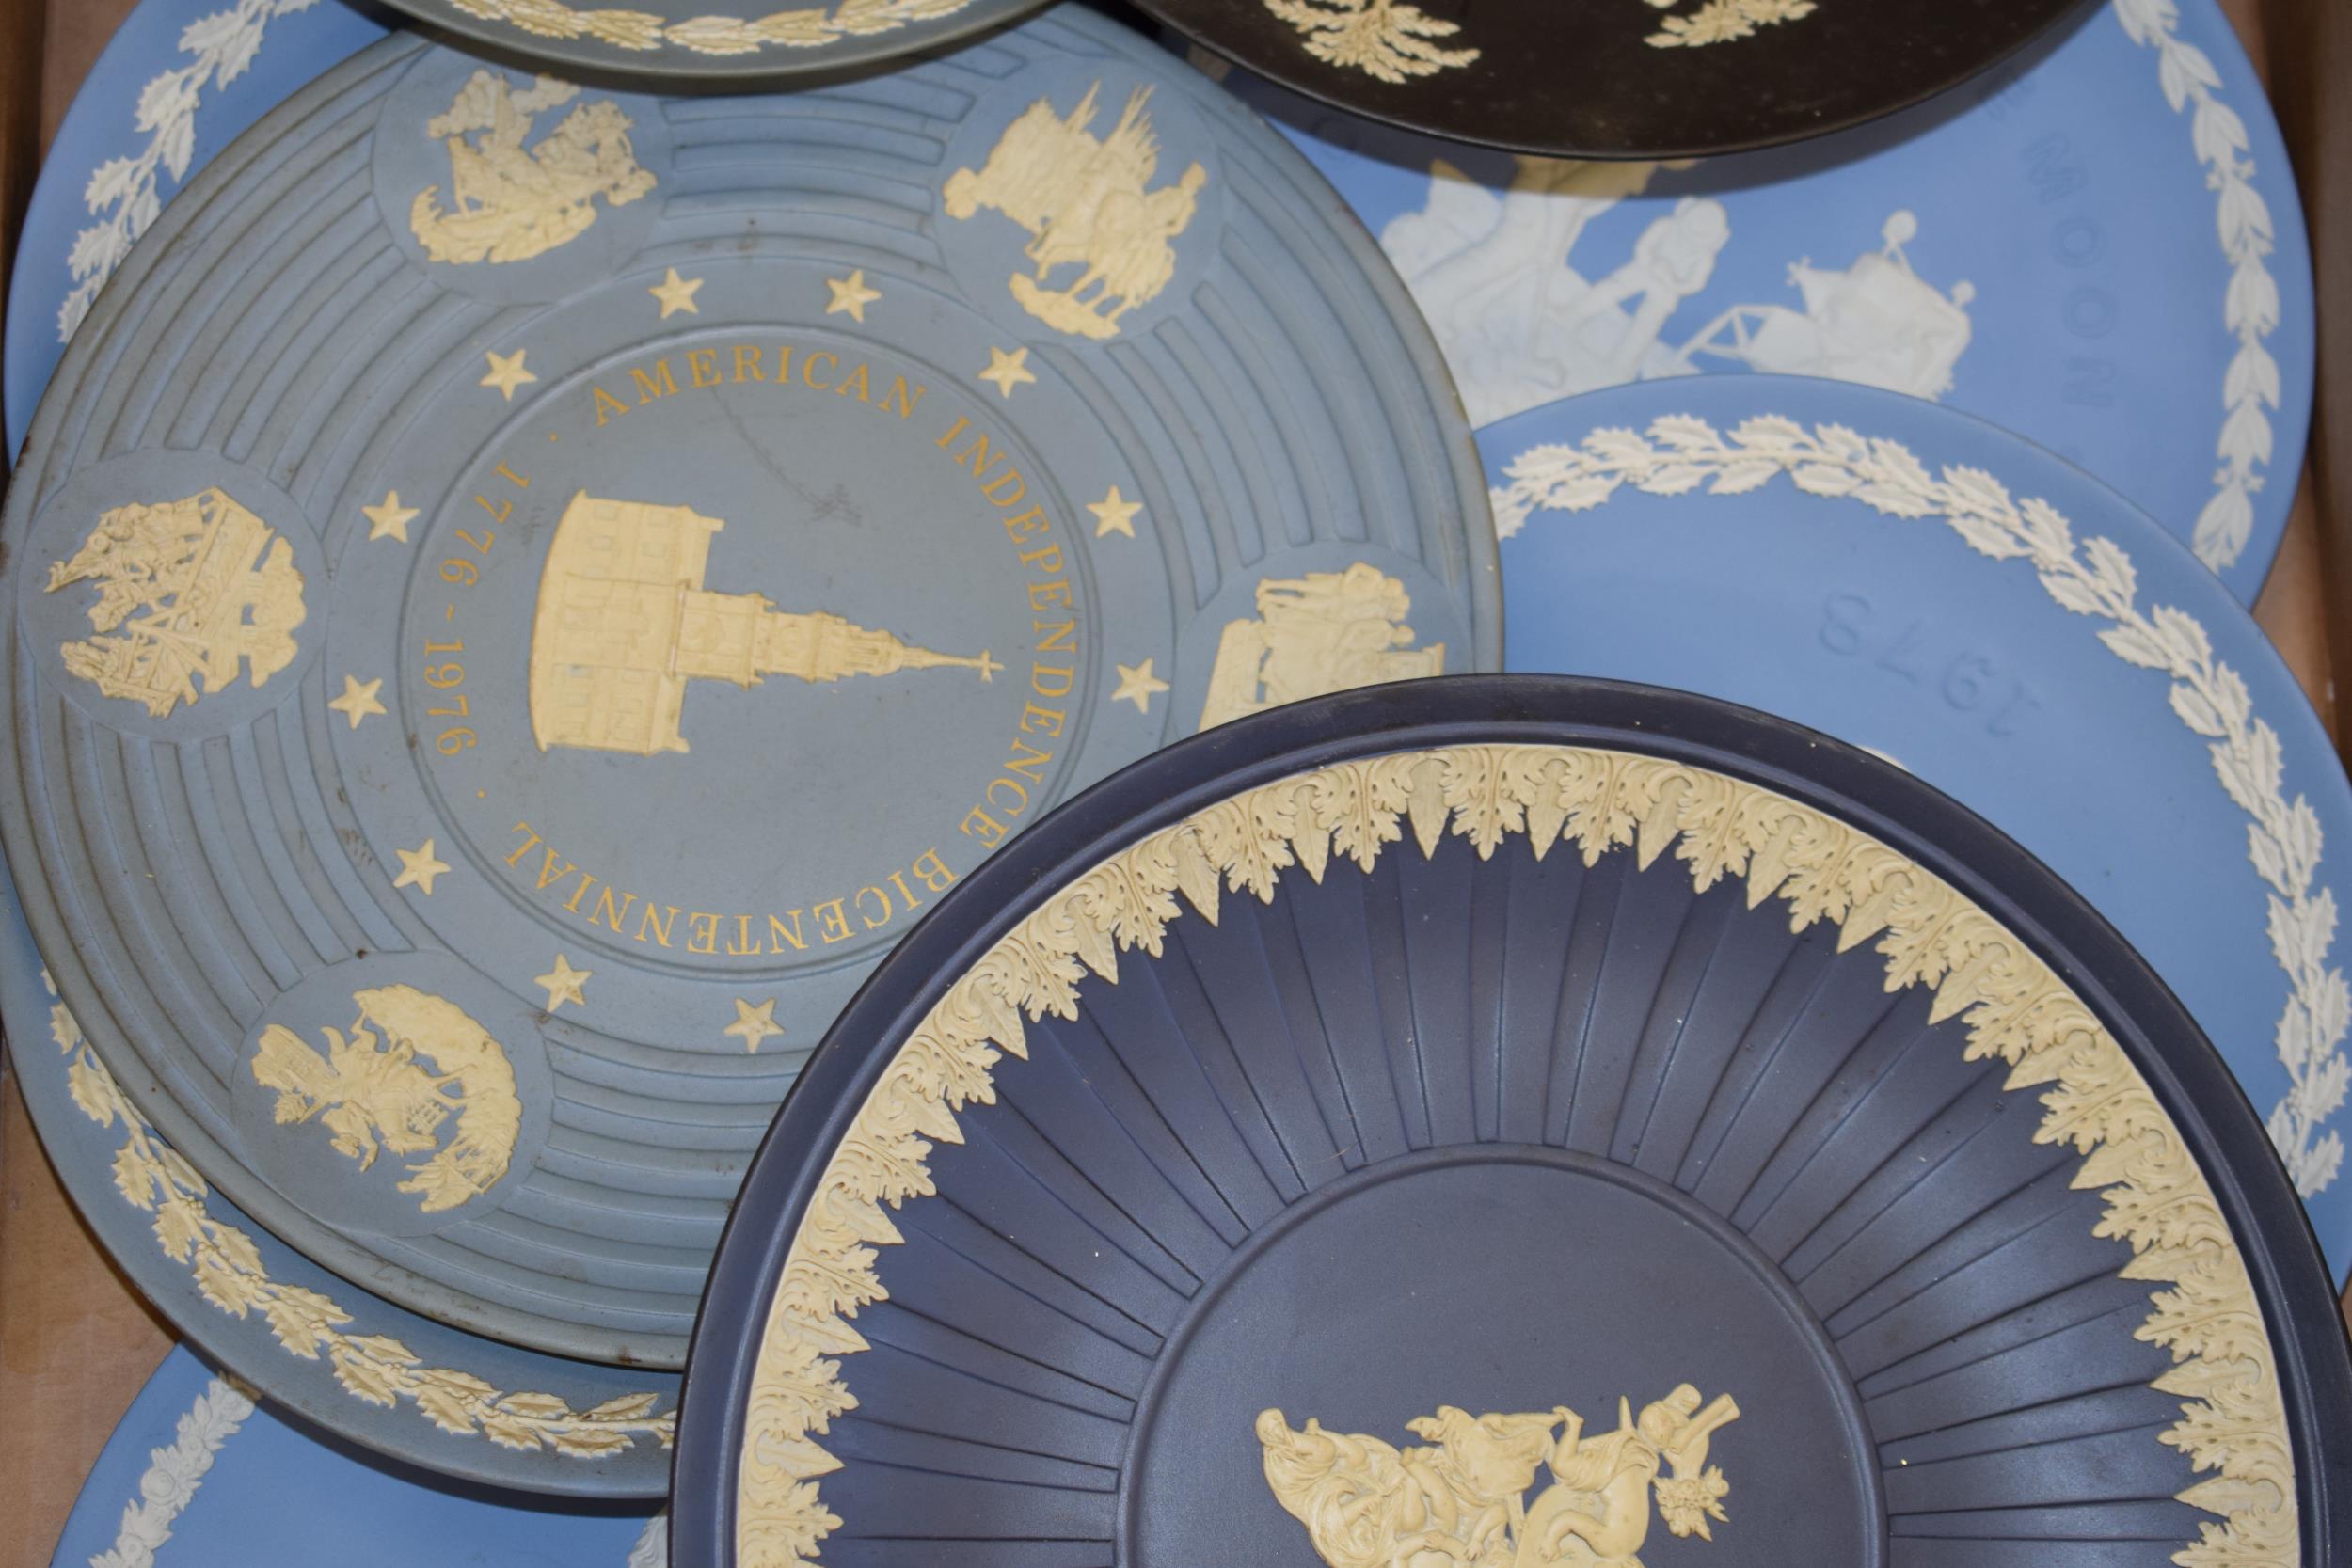 Wedgwood Jasperware plates in colours such as blue, cobalt blue and black in varying patterns and - Image 3 of 4